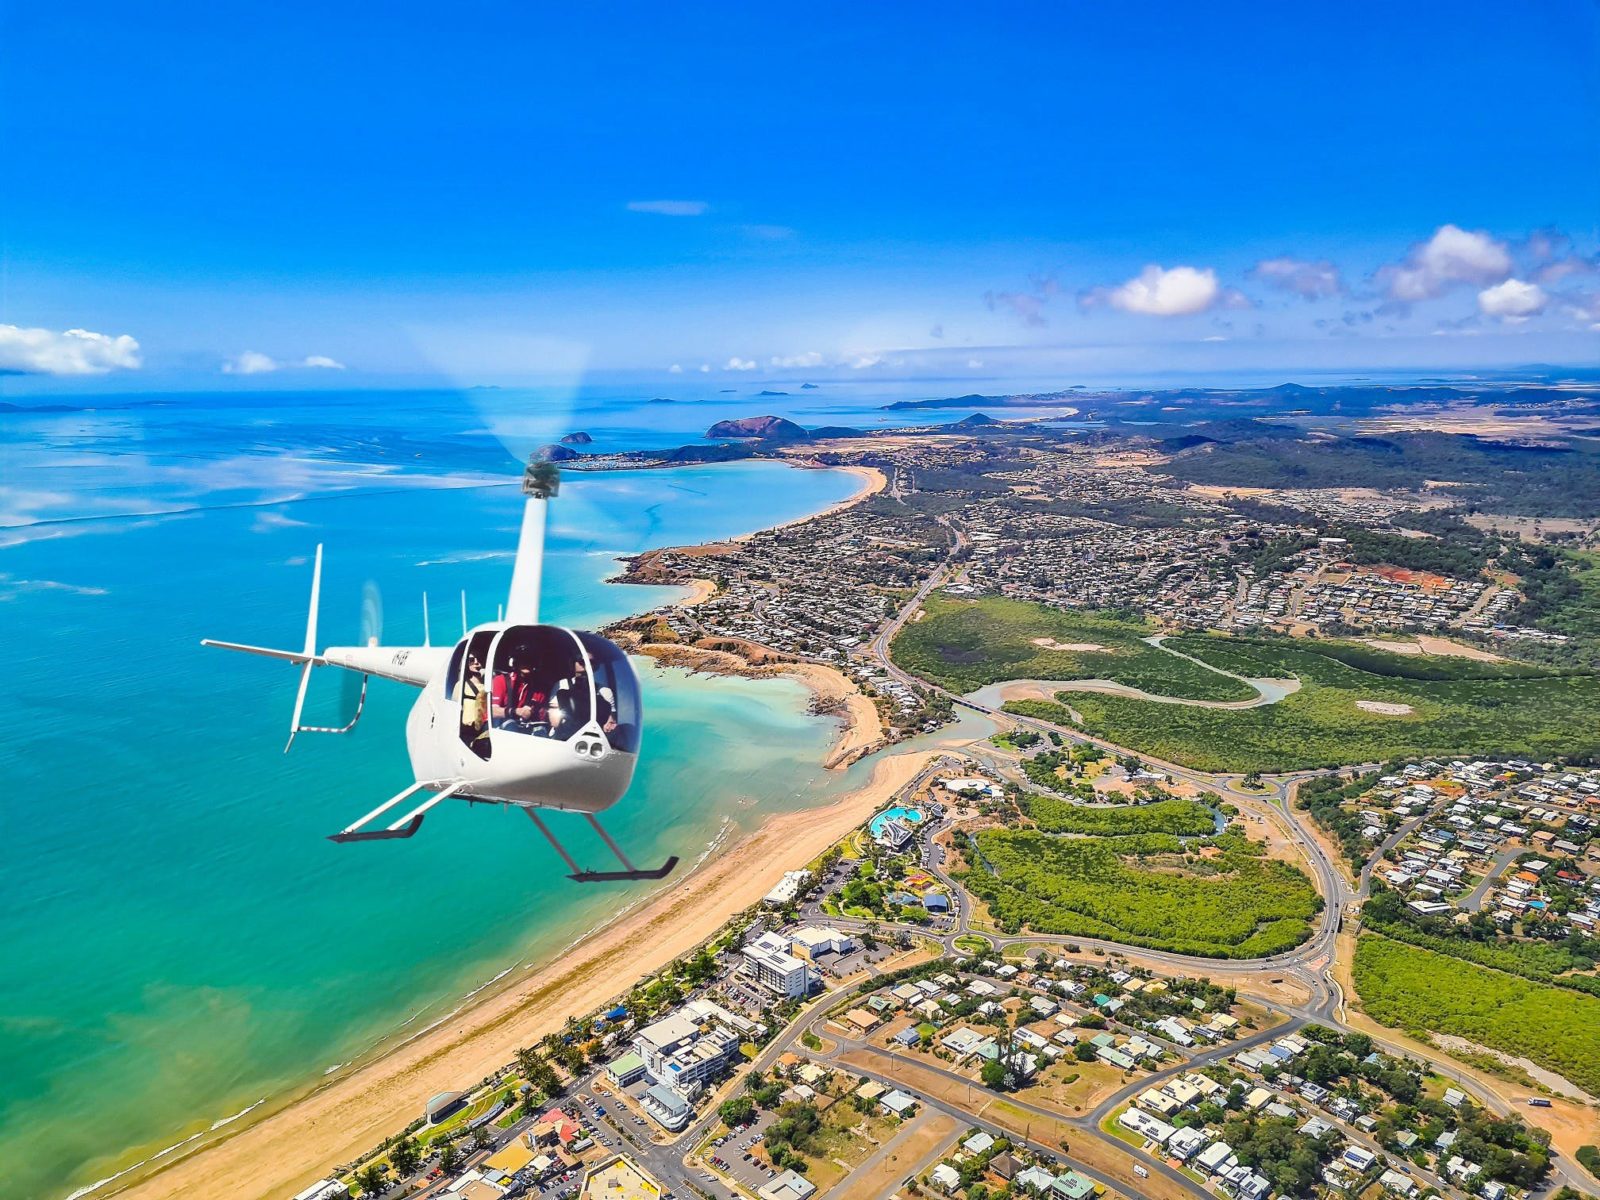 Photo of helicopter flying over Capricorn Coast